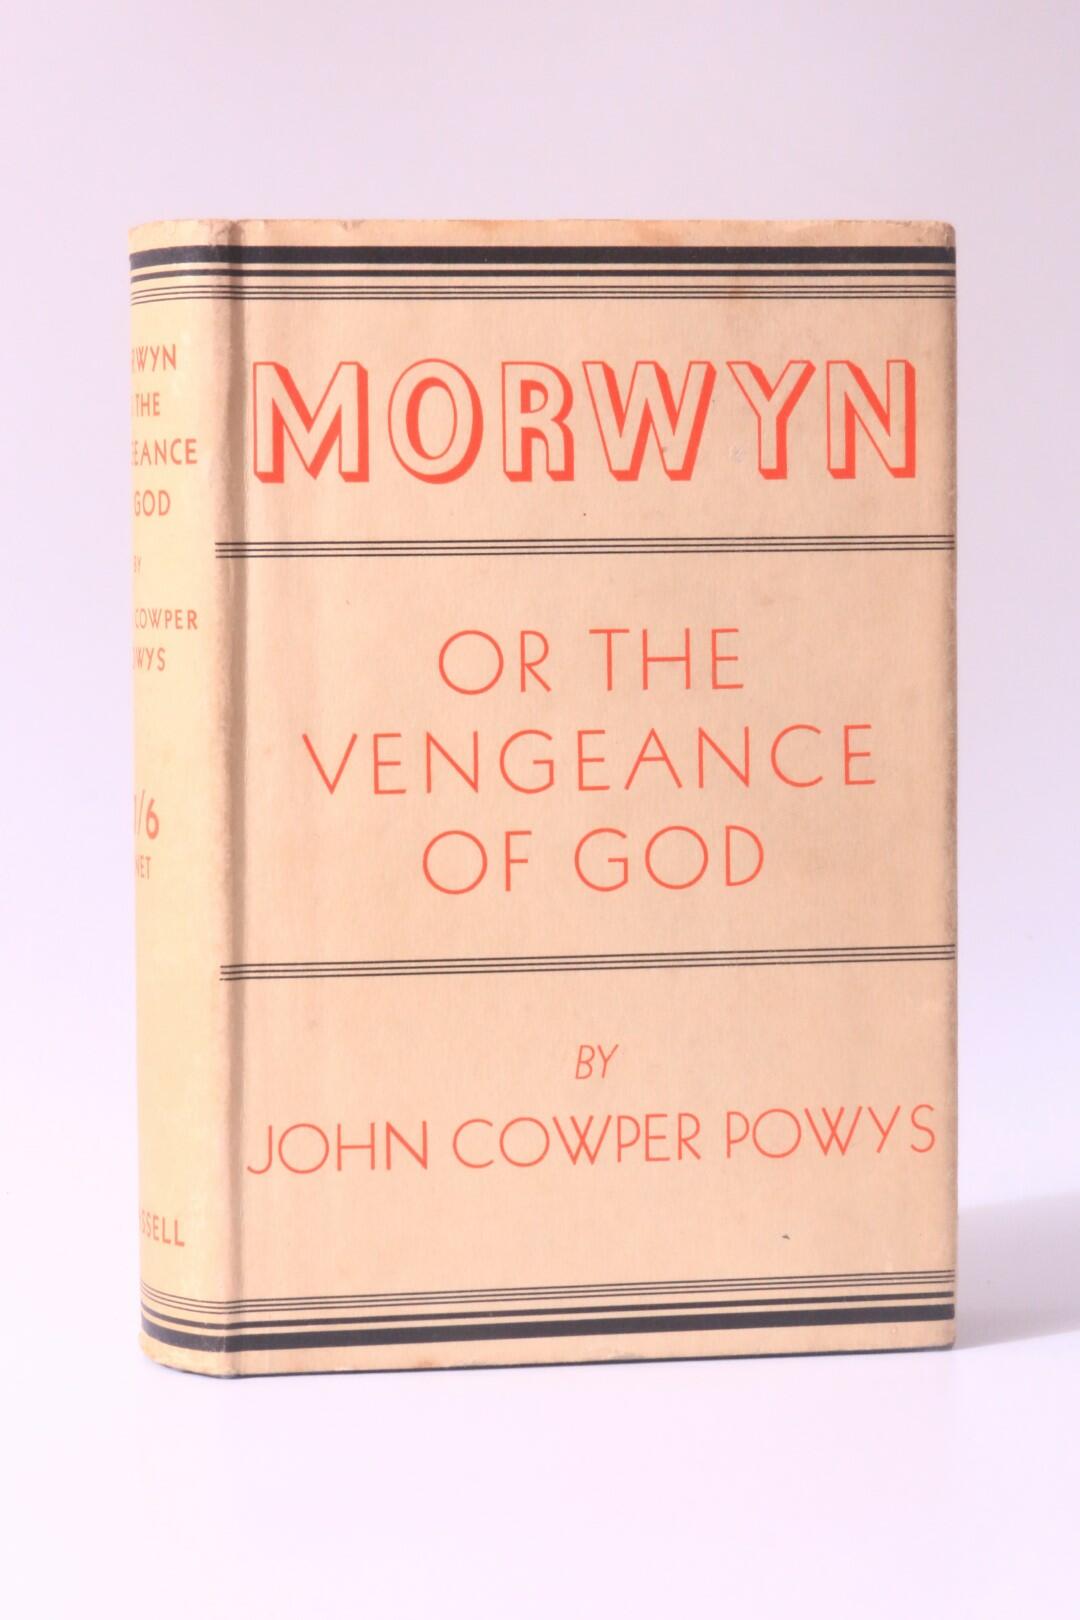 John Cowper Powys - Morwyn or the Vengeance of God - Cassell, 1937, First Edition.